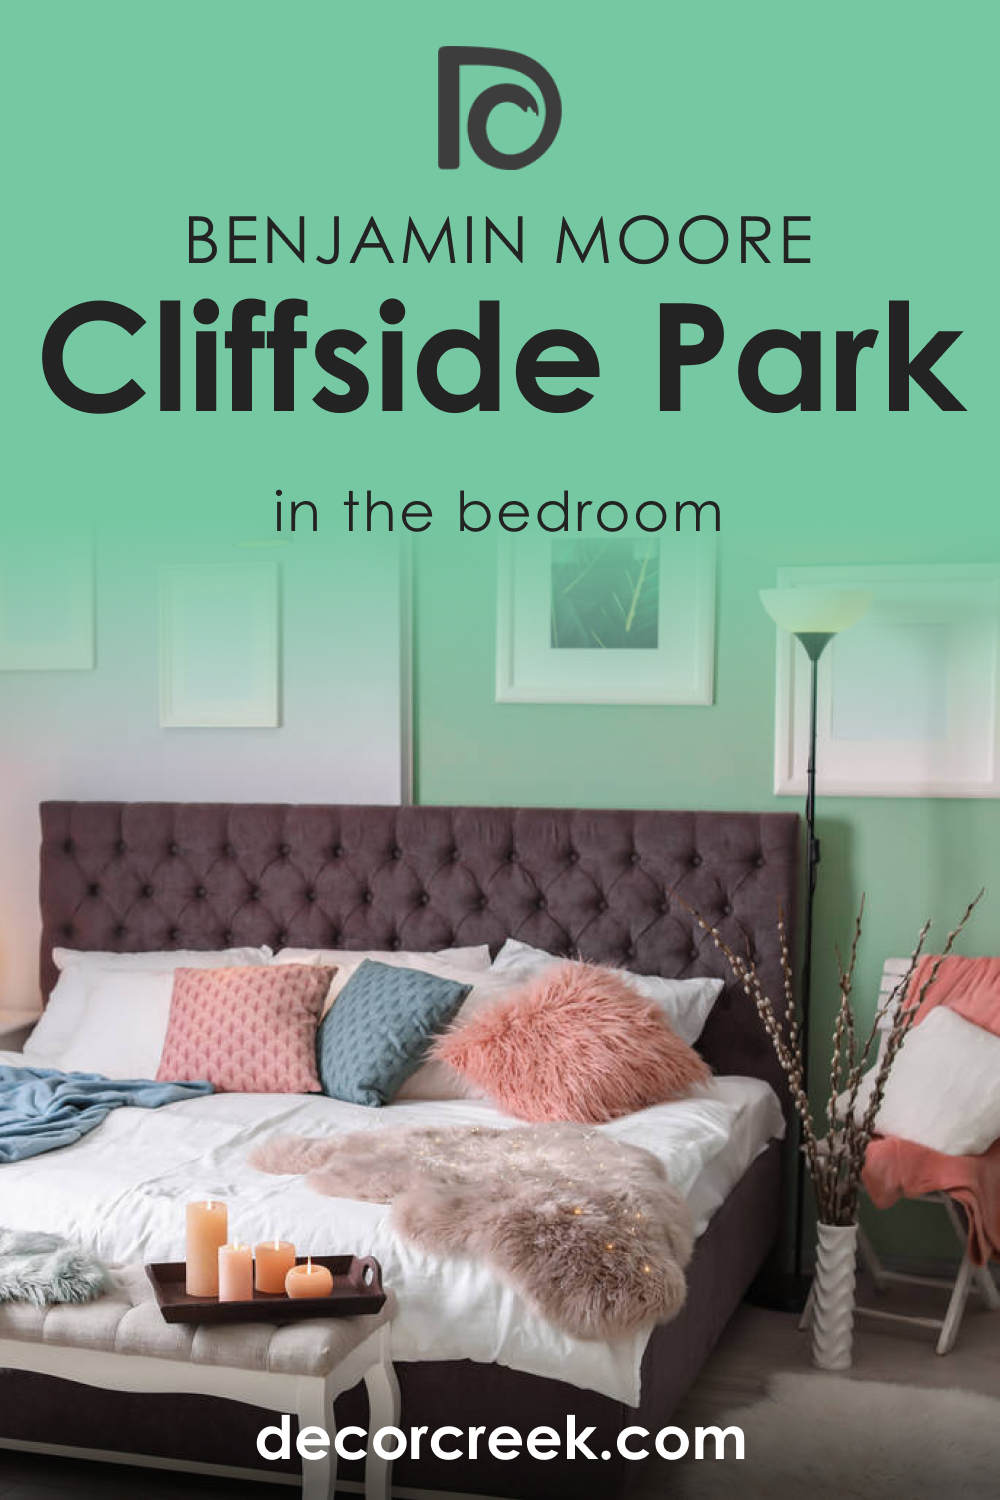 How to Use Cliffside Park 579 in the Bedroom?